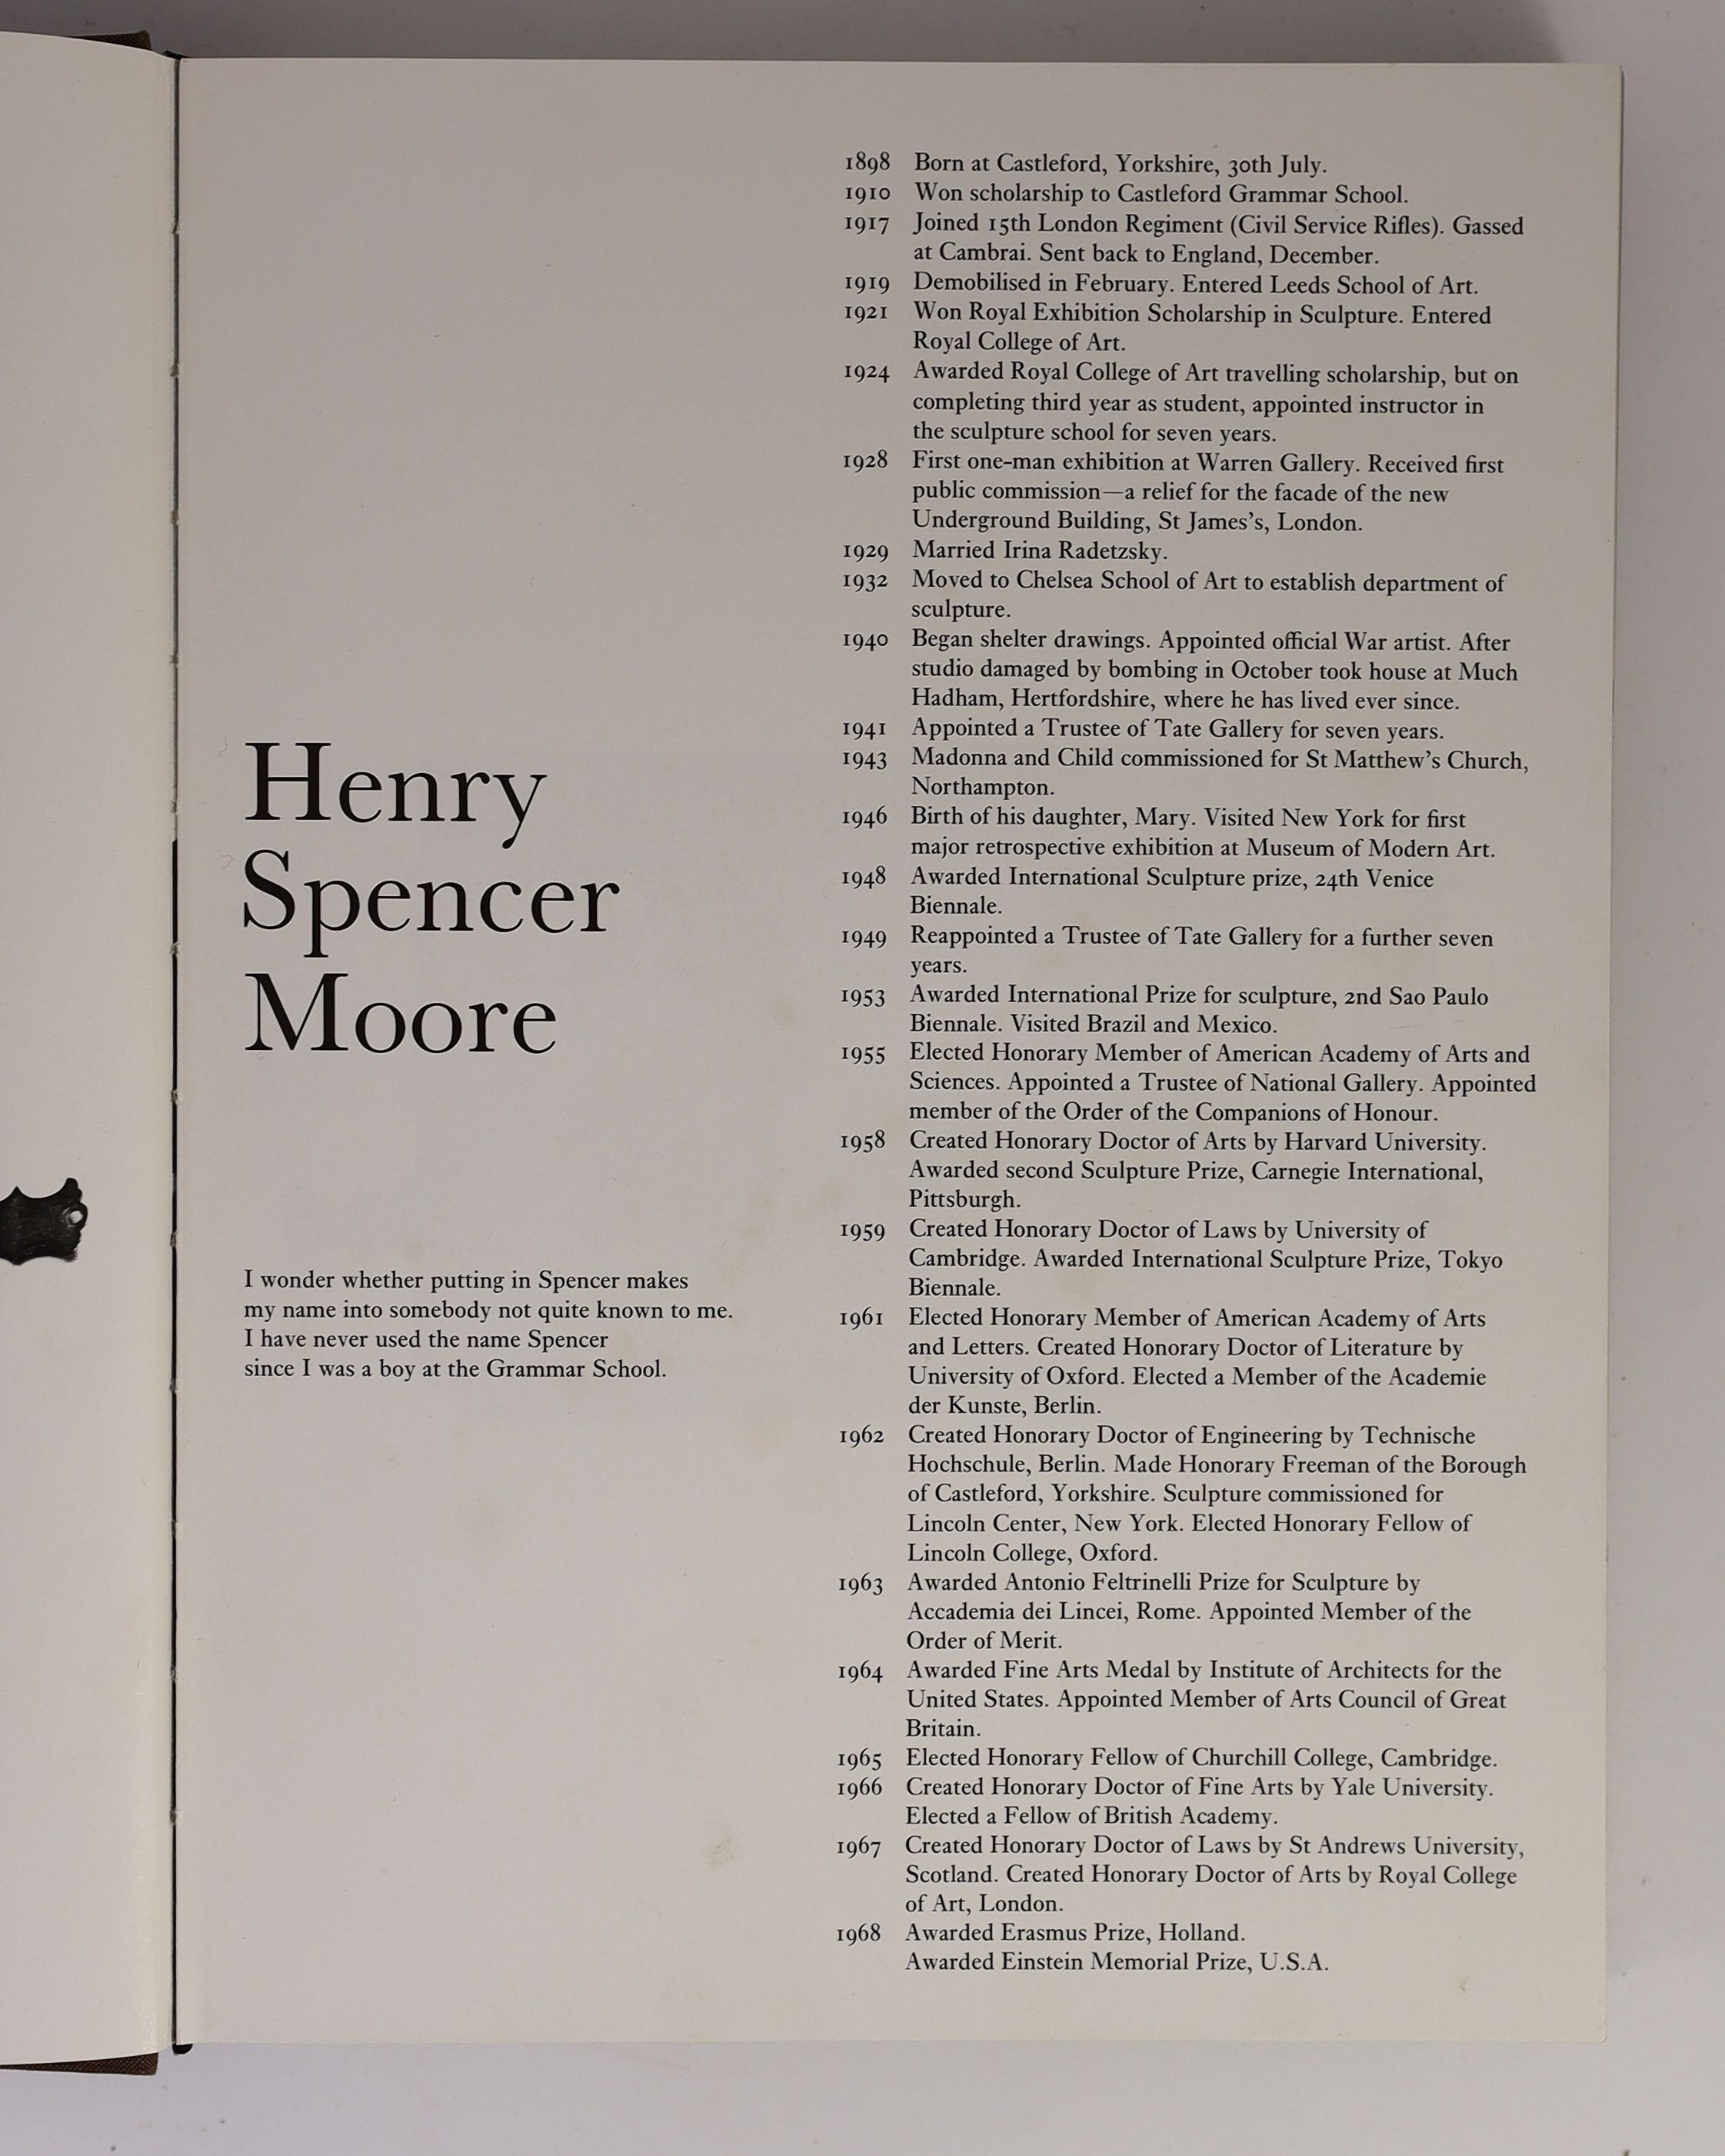 Hedgecoe, John - Henry Spencer Moore, 1st edition, with authors presentation inscription, dated 1971, Thomas Nelson, London, 1968, in slip case.